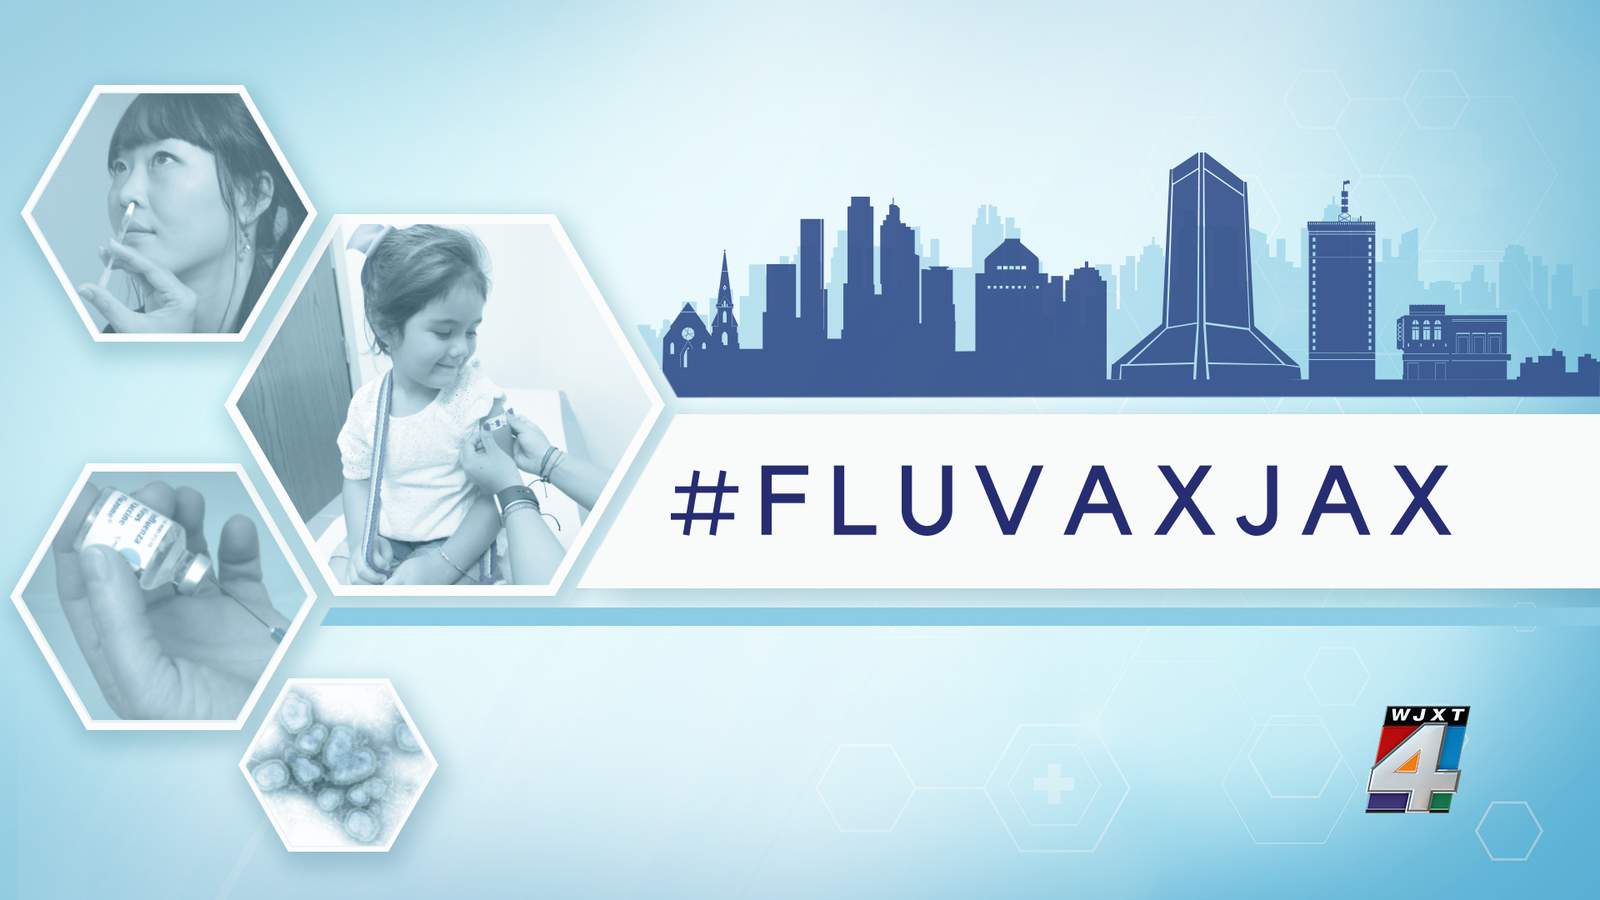 All you need to know about #FluVaxJax campaign